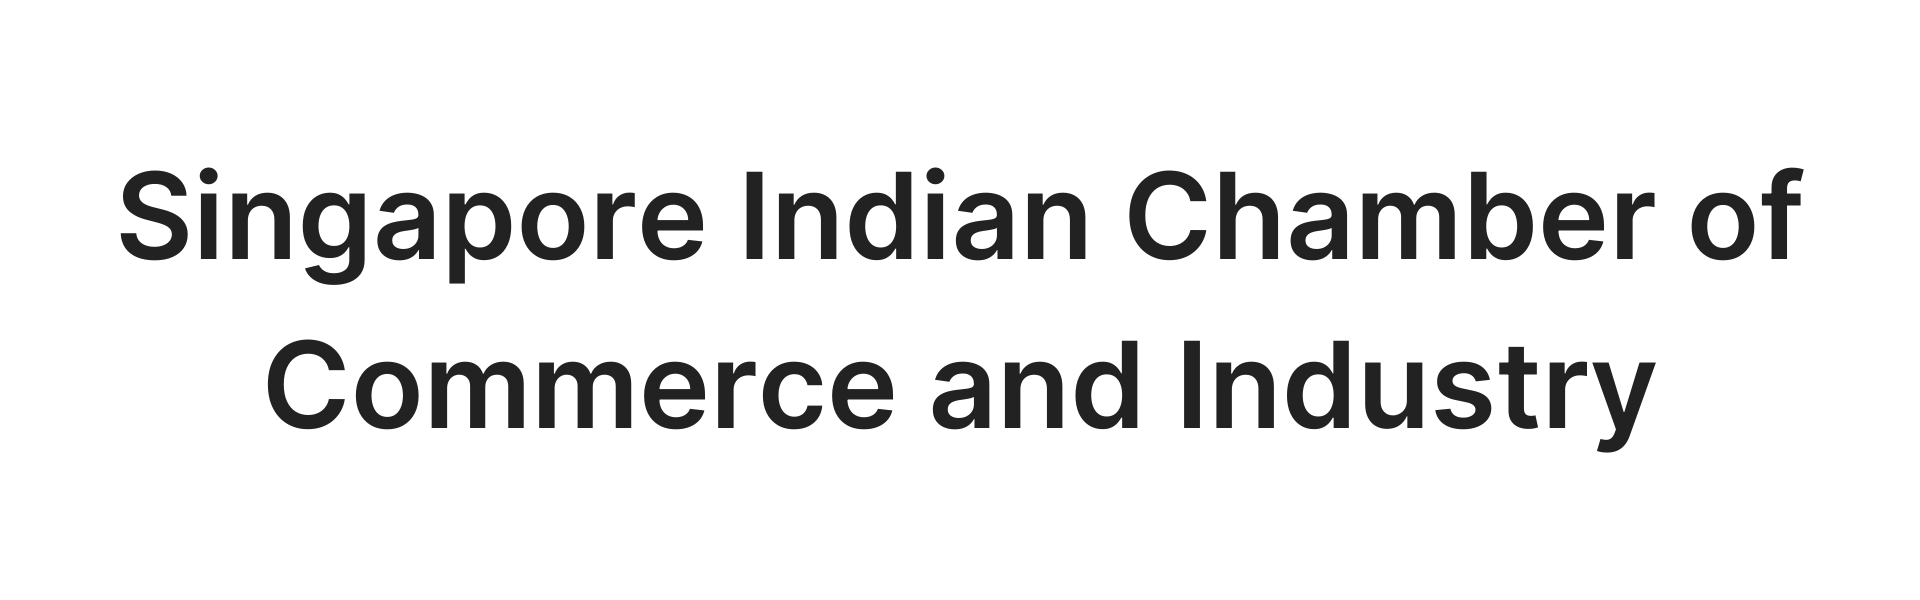 Singapore Indian Chamber of Commerce and Industry